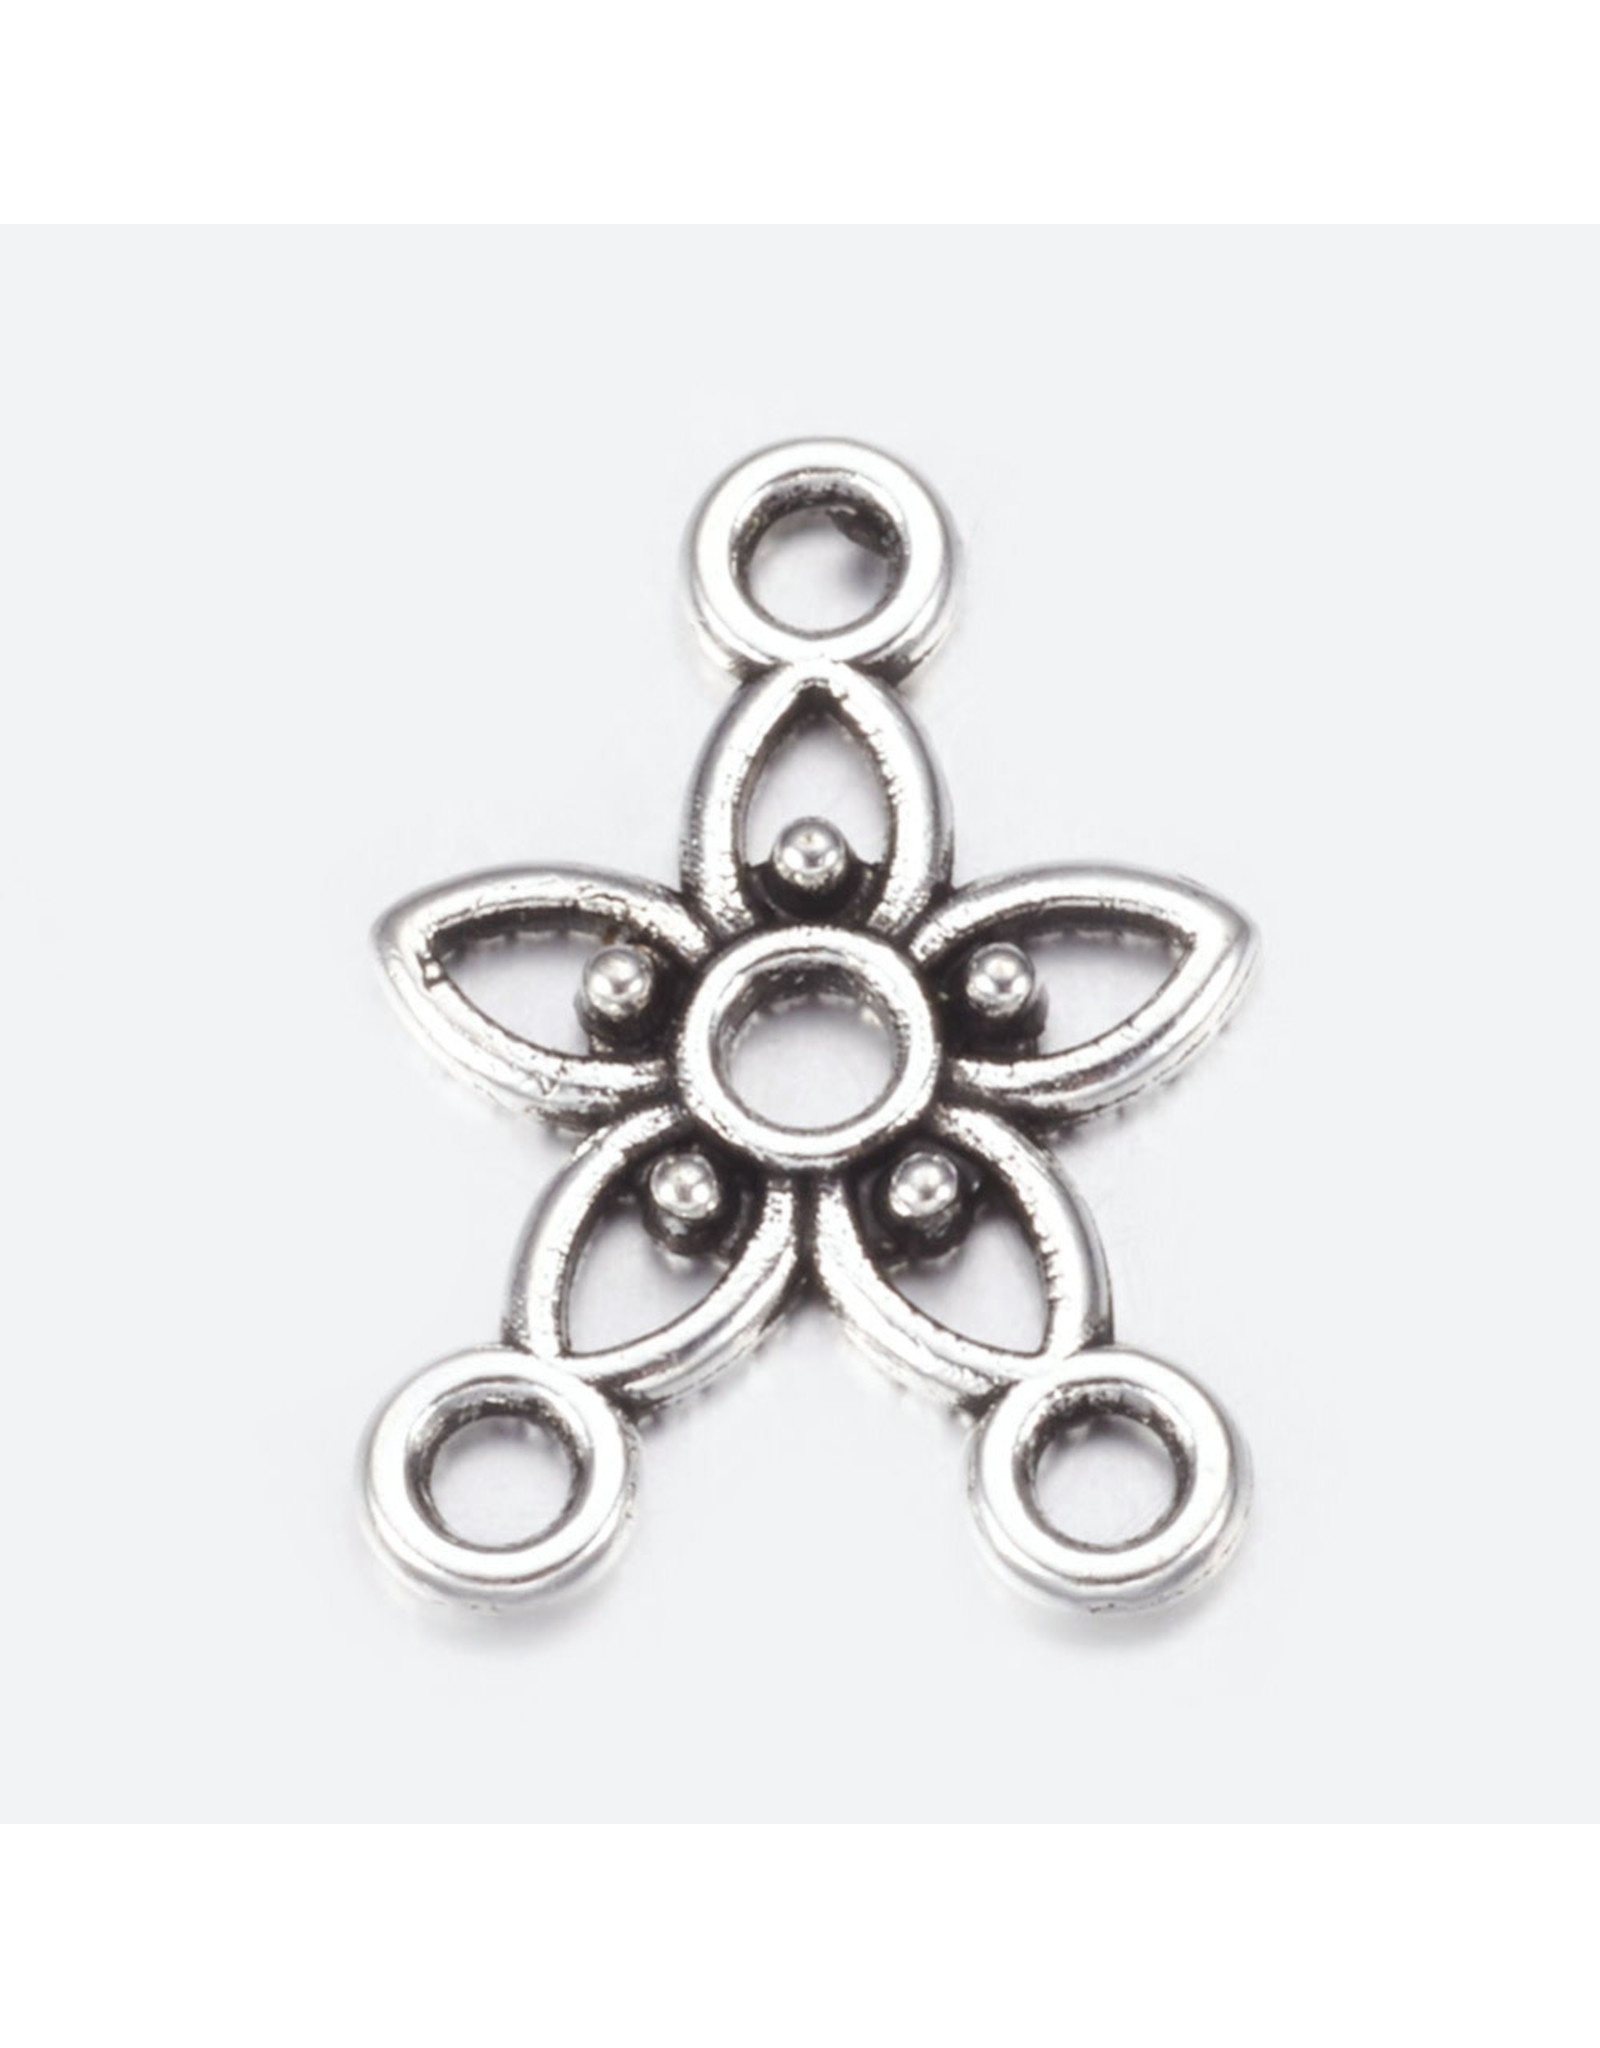 Flower Link (1to2) 12x21mm Antique Silver  x10  NF